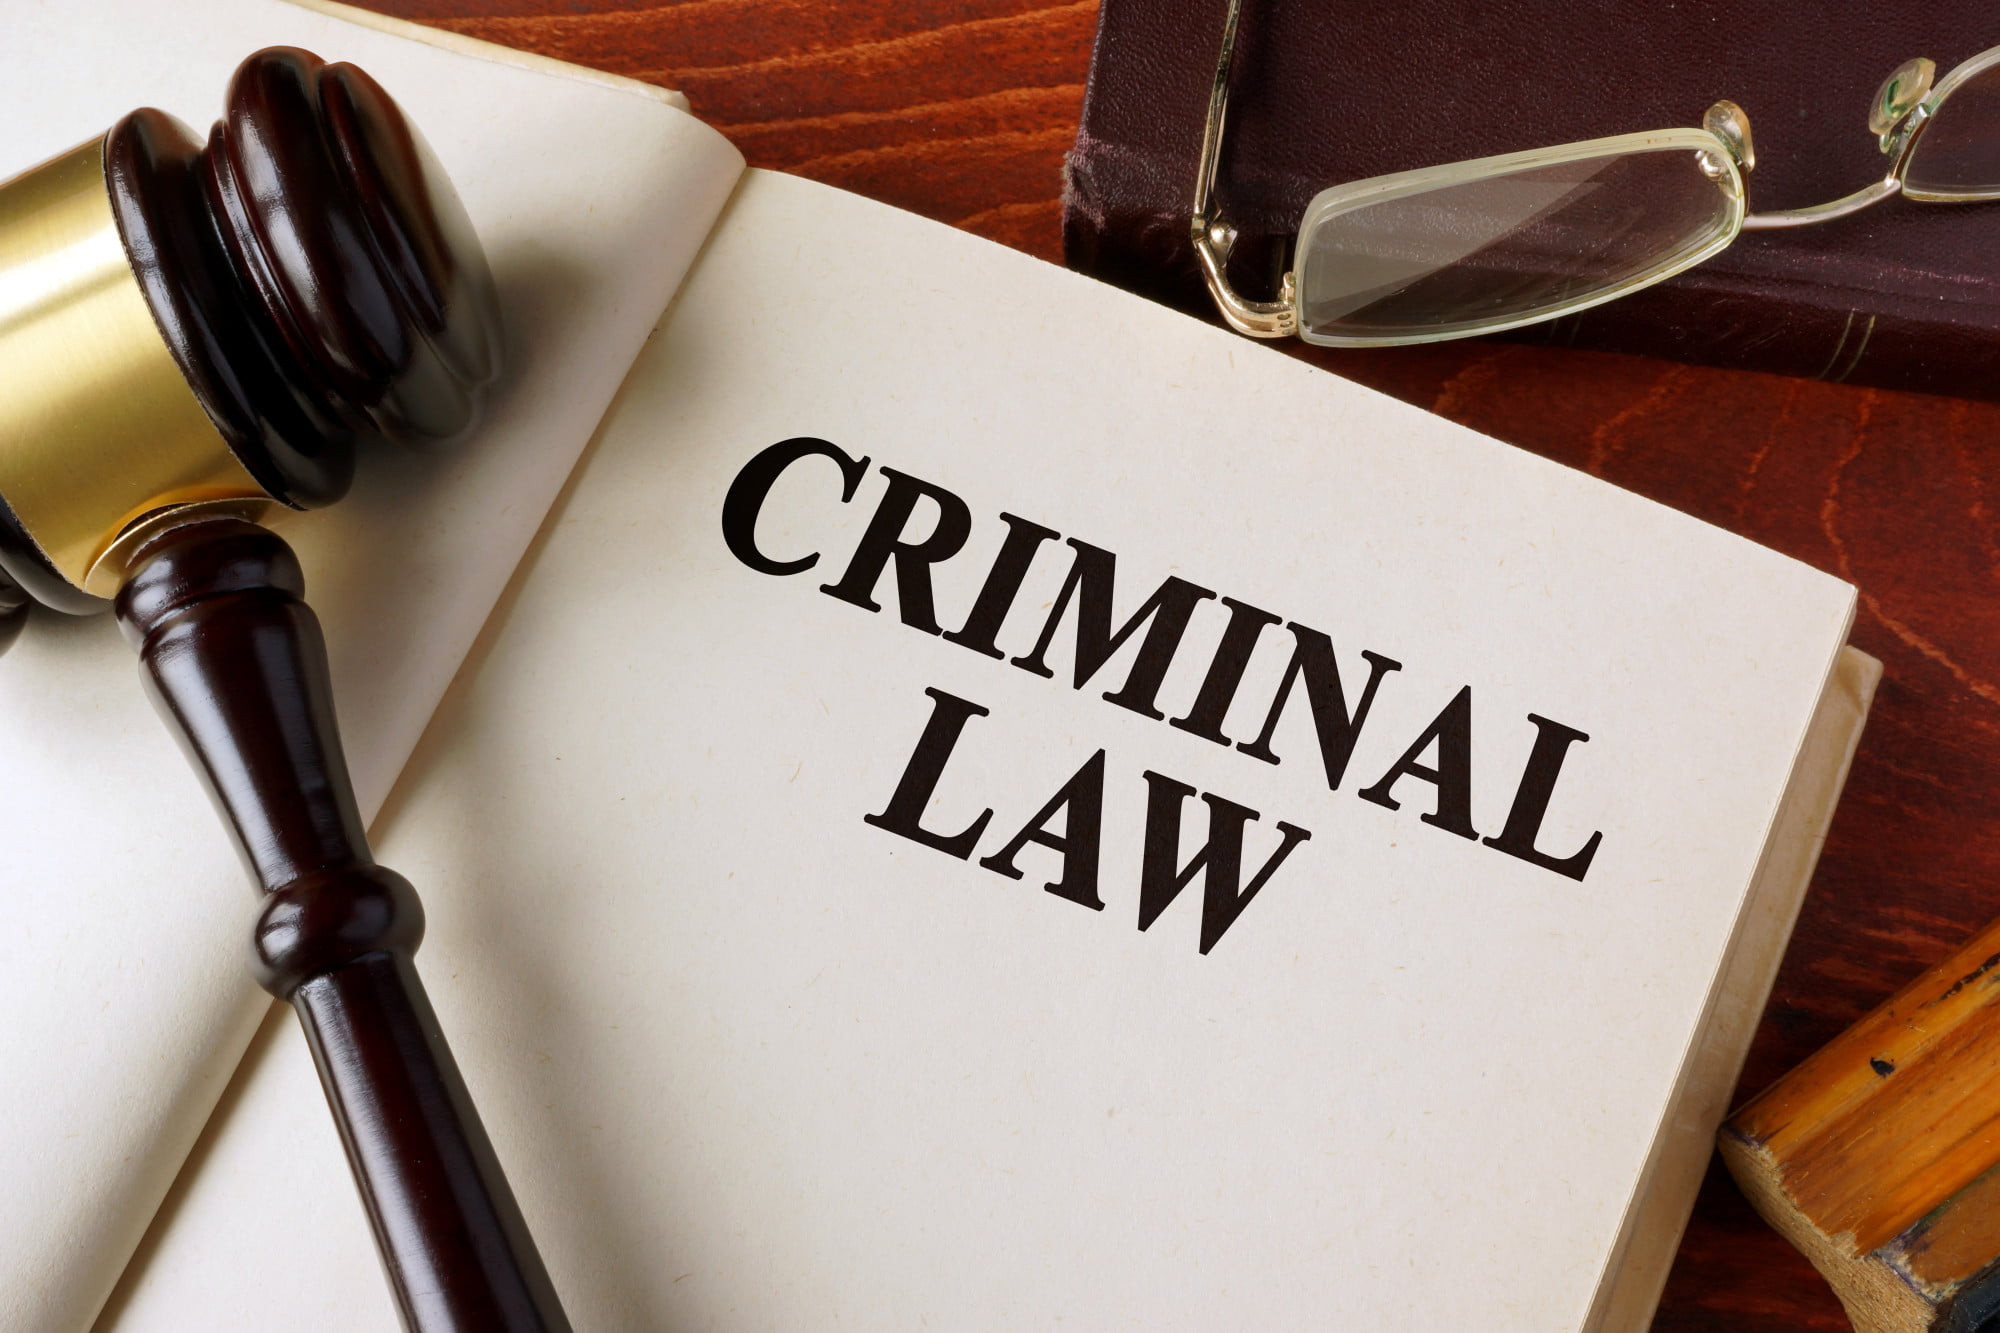 It is important to hire a reliable and professional criminal defense lawyer to handle your case. Here are 4 questions to ask before hiring.